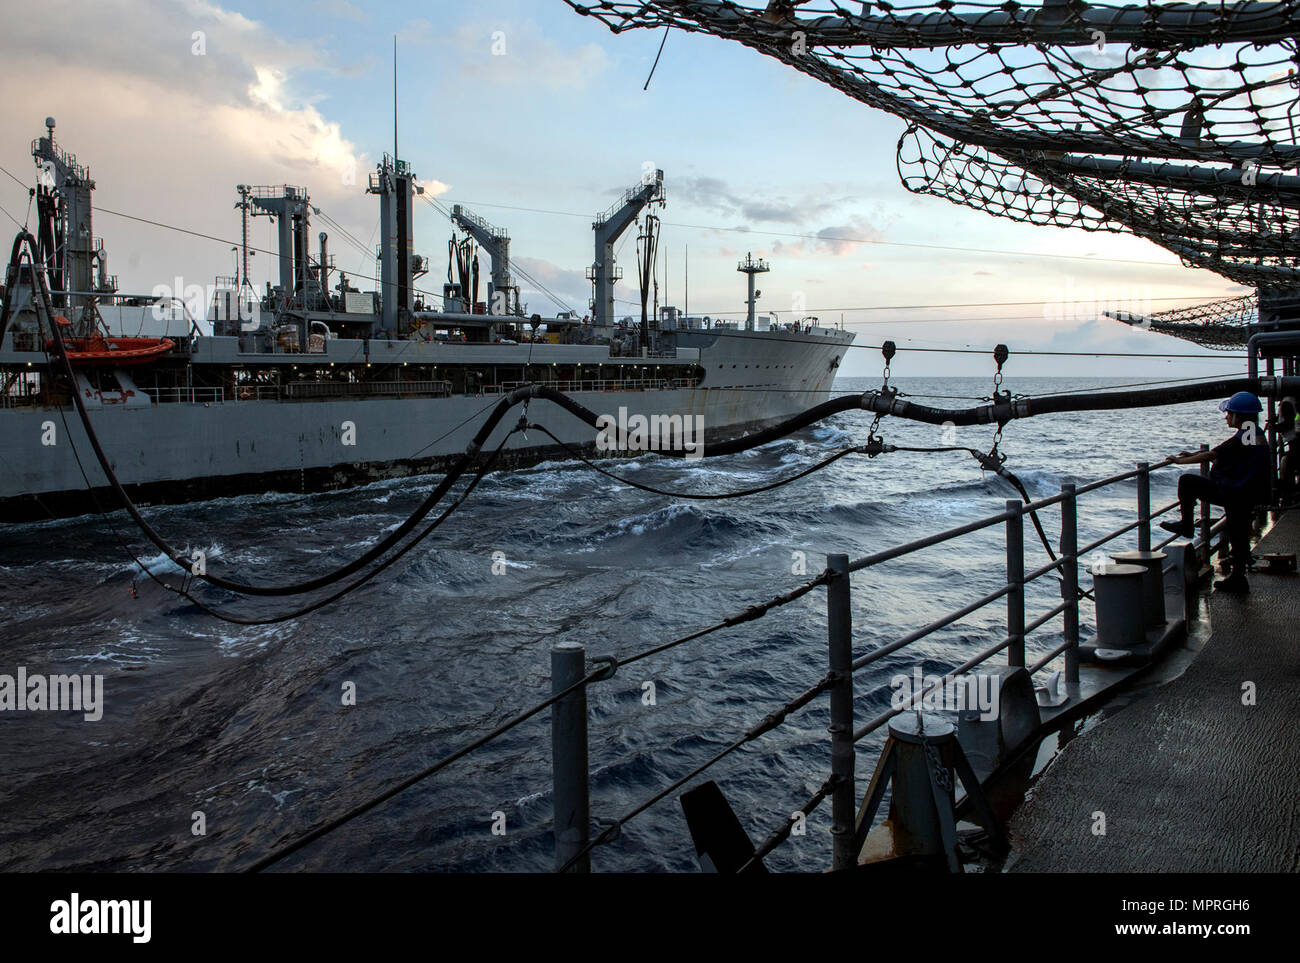 170411-N-FT178-013 SOUTH CHINA SEA (April 11, 2017) Boatswain’s Mate Seaman Athalia Chavez, from Bakersfield, California, observes a replenishment-at-sea with fleet replenishment oiler USNS Pecos (T-AO 197) aboard Ticonderoga-class guided-missile cruiser USS Lake Champlain (CG 57). Lake Champlain is on a regularly scheduled Western Pacific deployment with the Carl Vinson Carrier Strike Group as part of the U.S. Pacific Fleet-led initiative to extend the command and control functions of the U.S. 3rd Fleet in the Indo-Asia-Pacific region. Navy aircraft carrier strike groups have patrolled the In Stock Photo